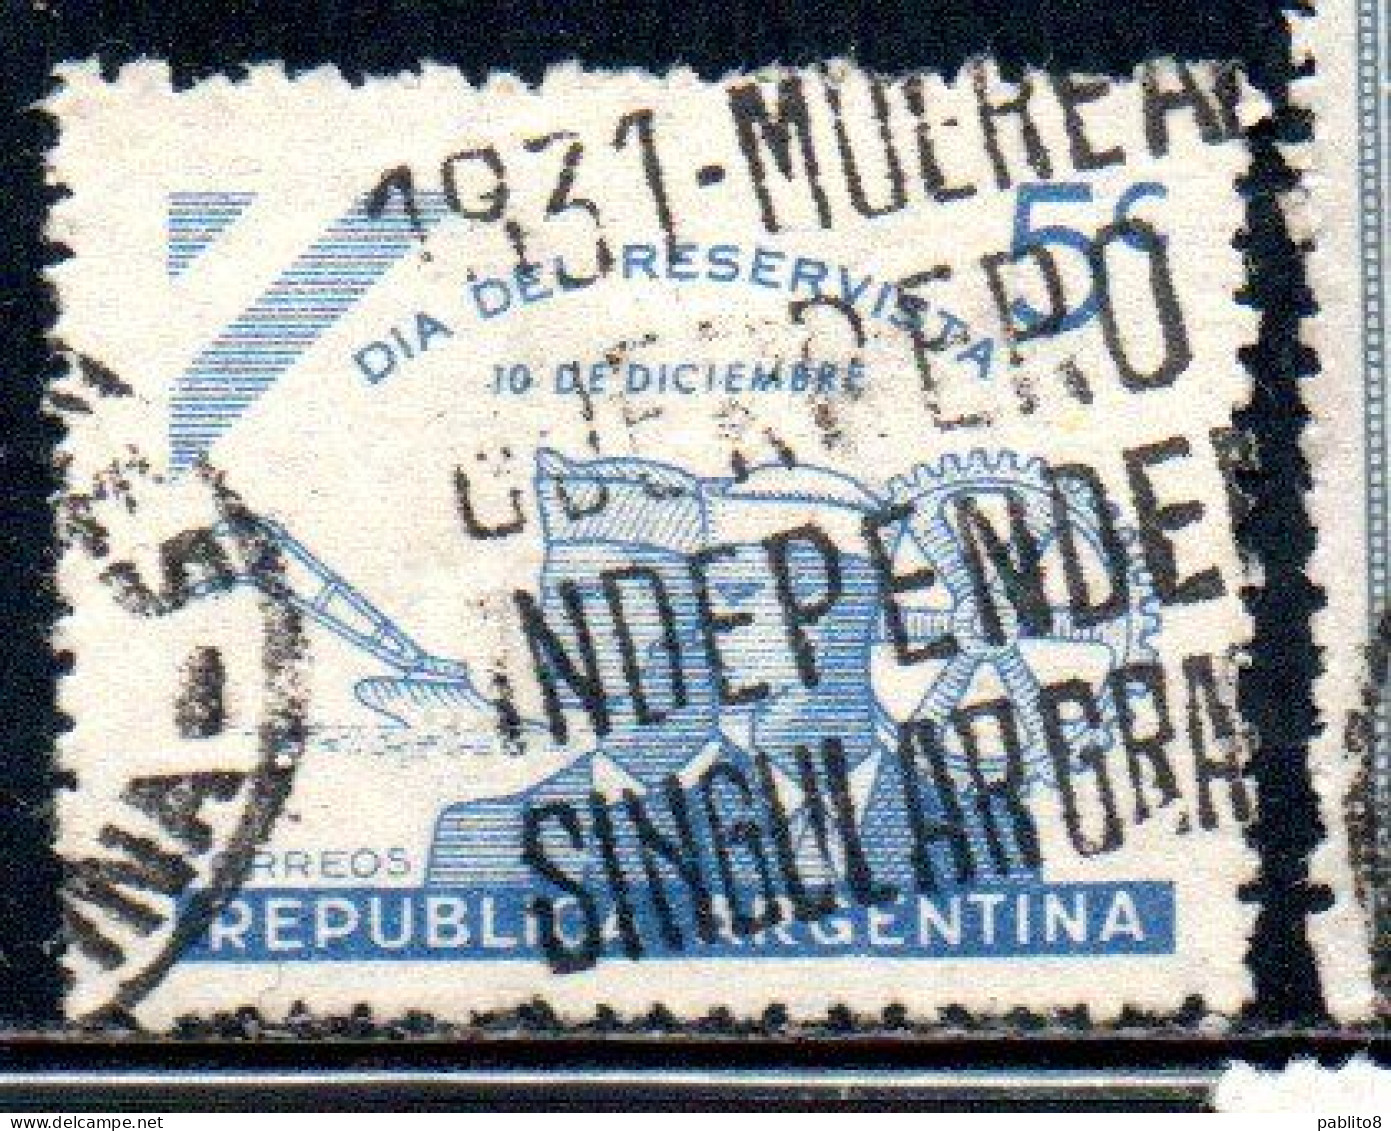 ARGENTINA 1944 DAY OF RESERVISTS 5c USED USADO OBLITERE' - Gebraucht